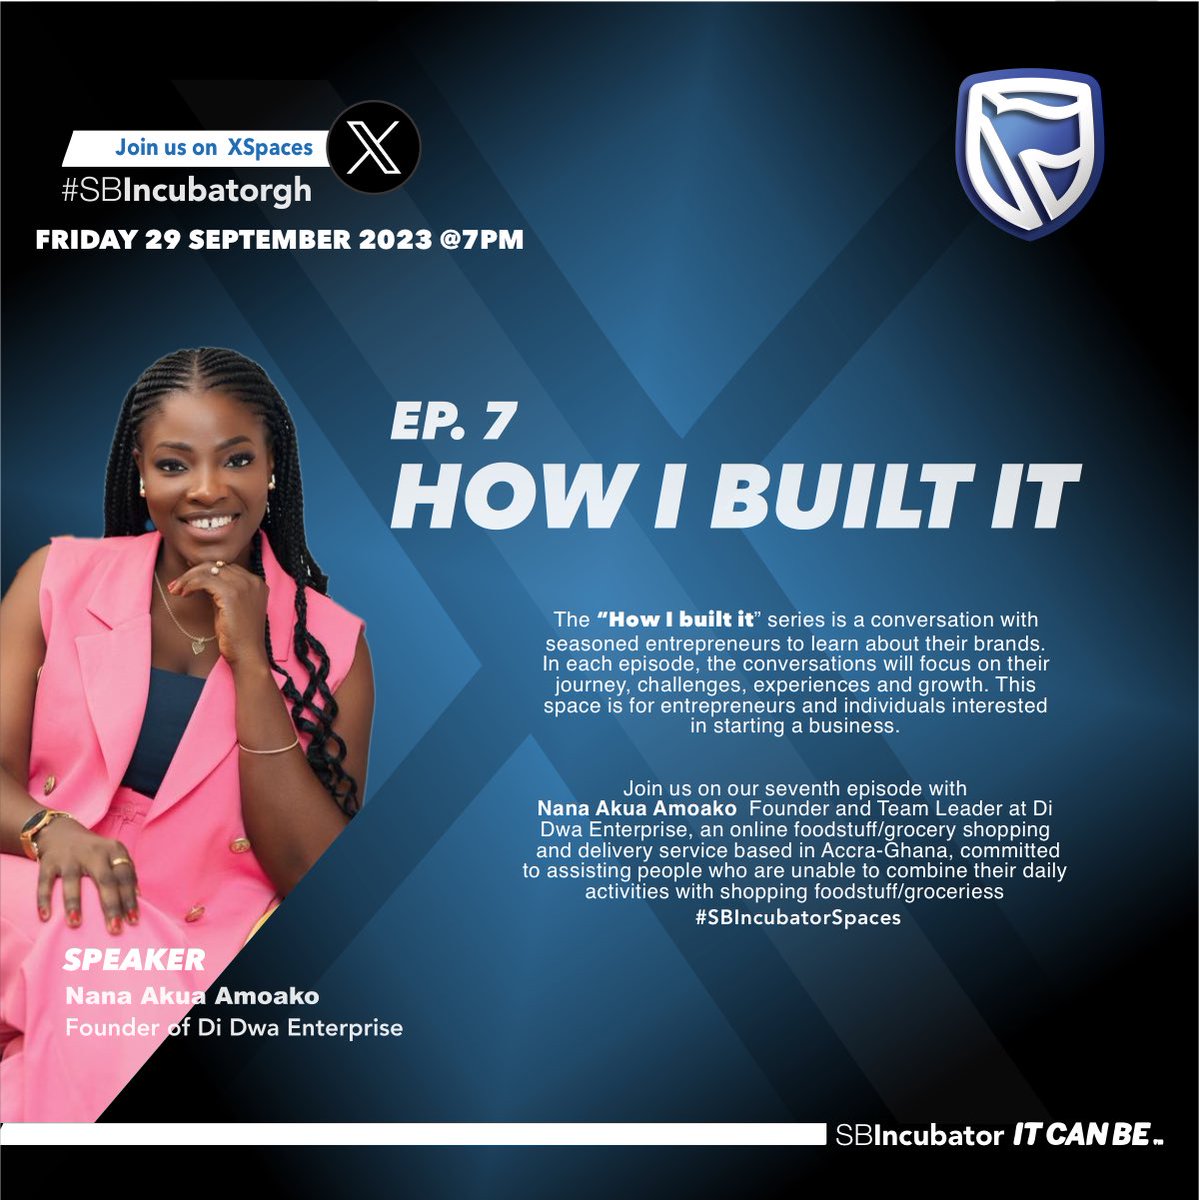 Welcome to another episode of the HOW I BUILT IT series on this episode we will be hosting Nana Akua Amoako, founder & team leader of Di Dwa Enterprise Click the link to mark your calendars you don’t want to miss this one #SBincubatorgh #gh #Stanbicbank twitter.com/i/spaces/1Mnxn…